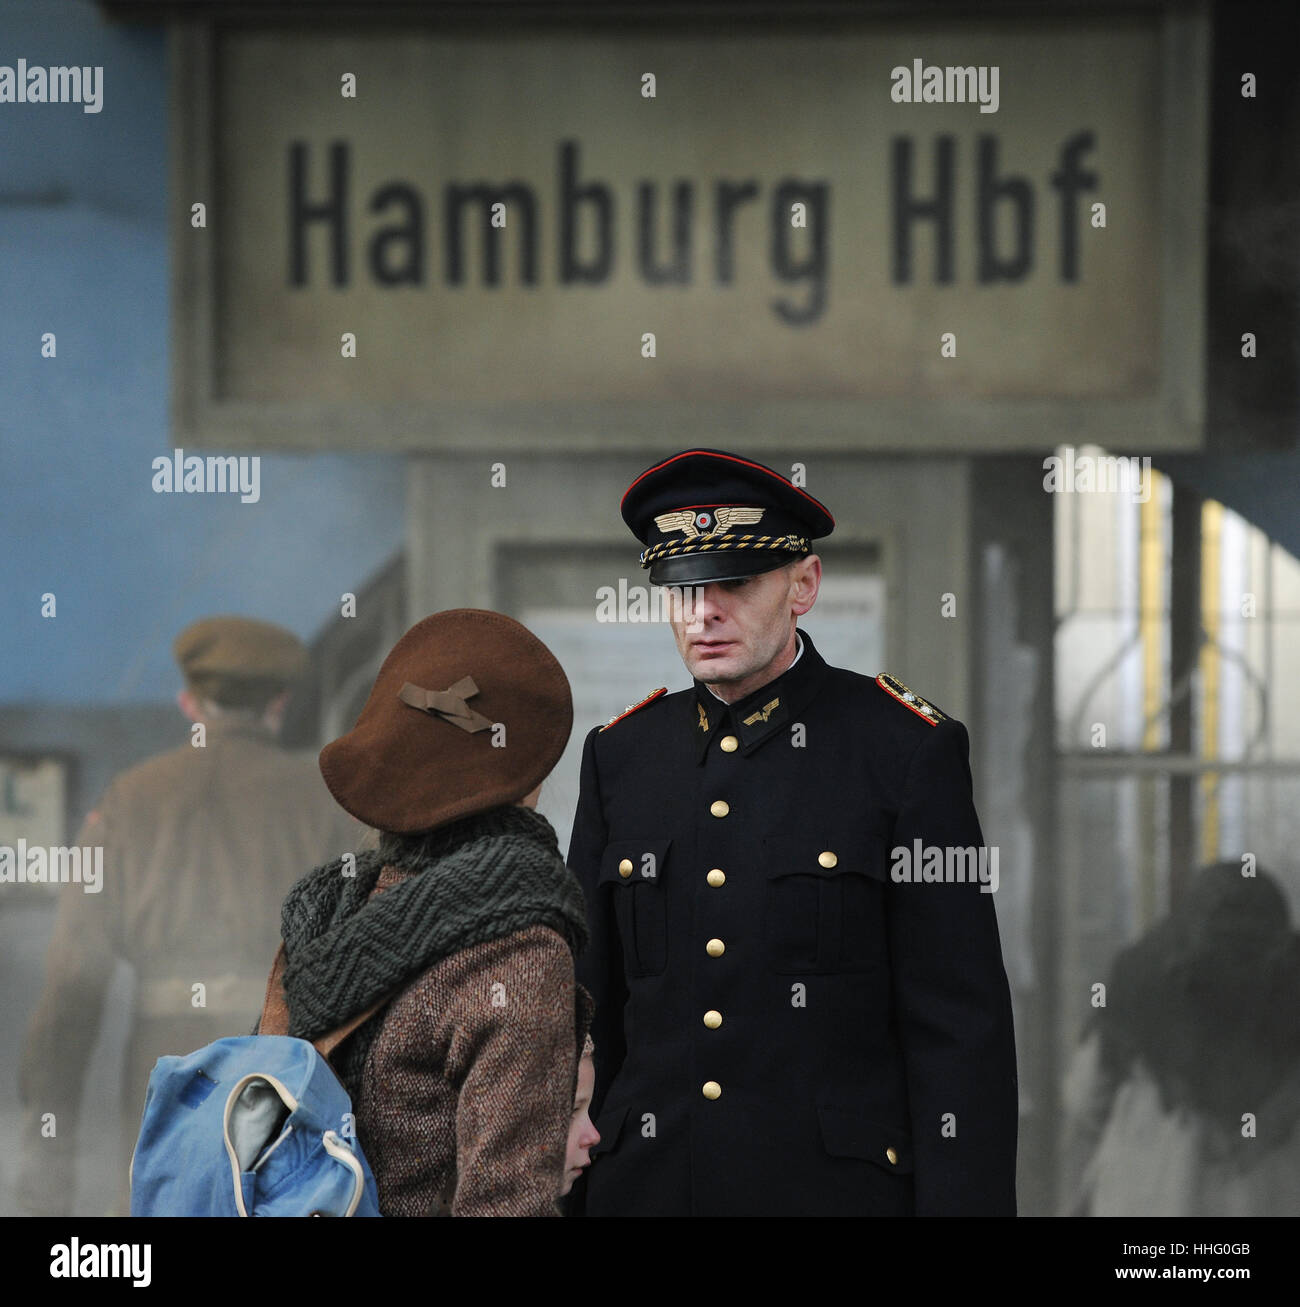 Prague, Czech Republic. 19th Jan, 2017. Filming of new World War Two drama The Aftermath set in post-war Hamburg, Germany in 1946 at Main Railway Station in Prague, Czech Republic, January 19, 2017. The film follows Keira Knightley (not pictured) as Rachael Morgan, whose colonel husband Lewis, played by Jason Clarke (not pictured), is put in charge of rebuilding the city of Hamburg. Credit: Ondrej Deml/CTK Photo/Alamy Live News Stock Photo